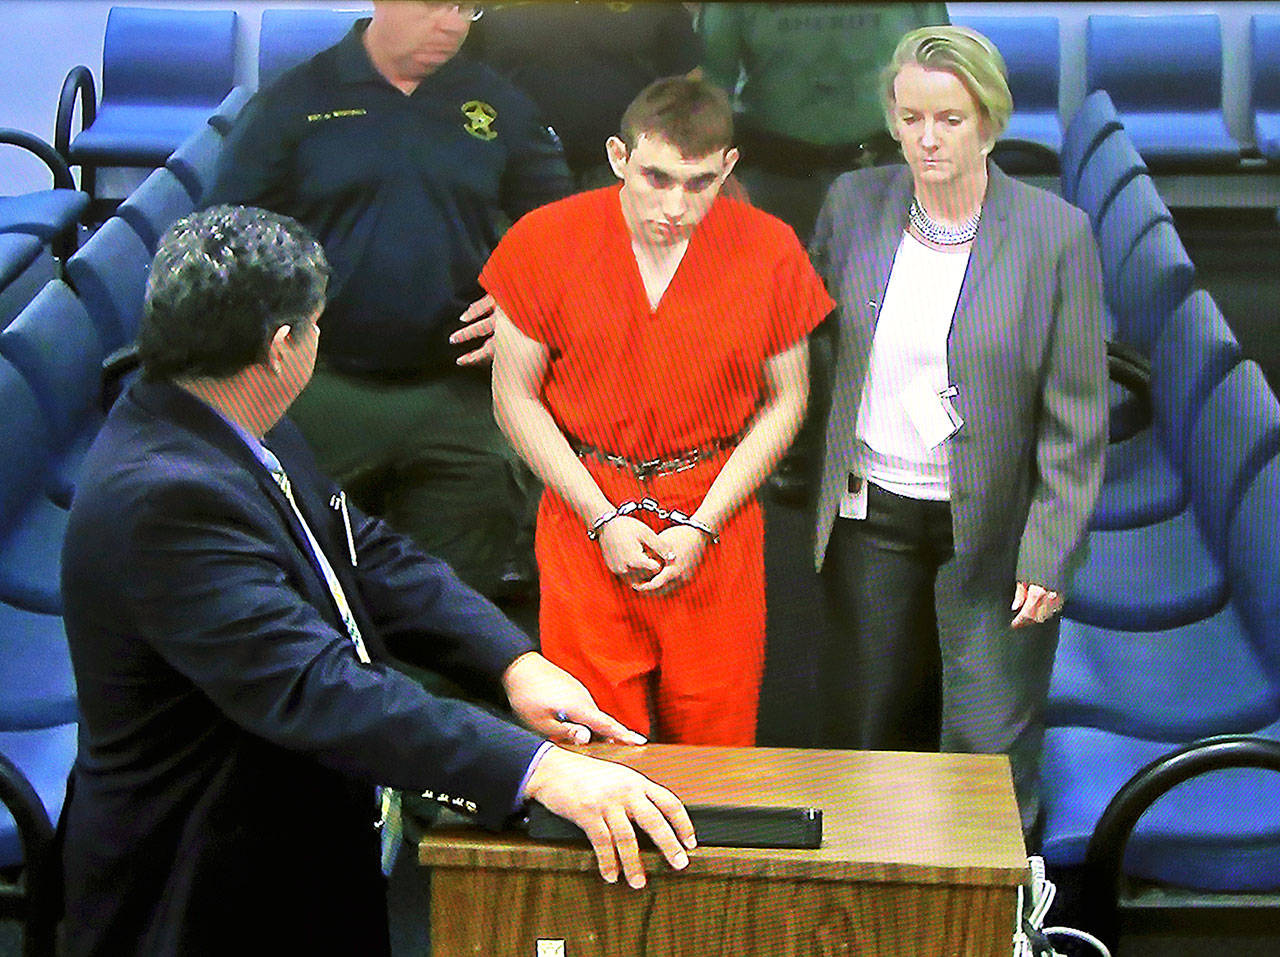 A video monitor shows school shooting suspect Nikolas Cruz (left) with public defender Melisa McNeille making an appearance in Broward County Court on Thursday, in Fort Lauderdale, Florida. (Susan Stocker/South Florida Sun-Sentinel via AP, Pool)